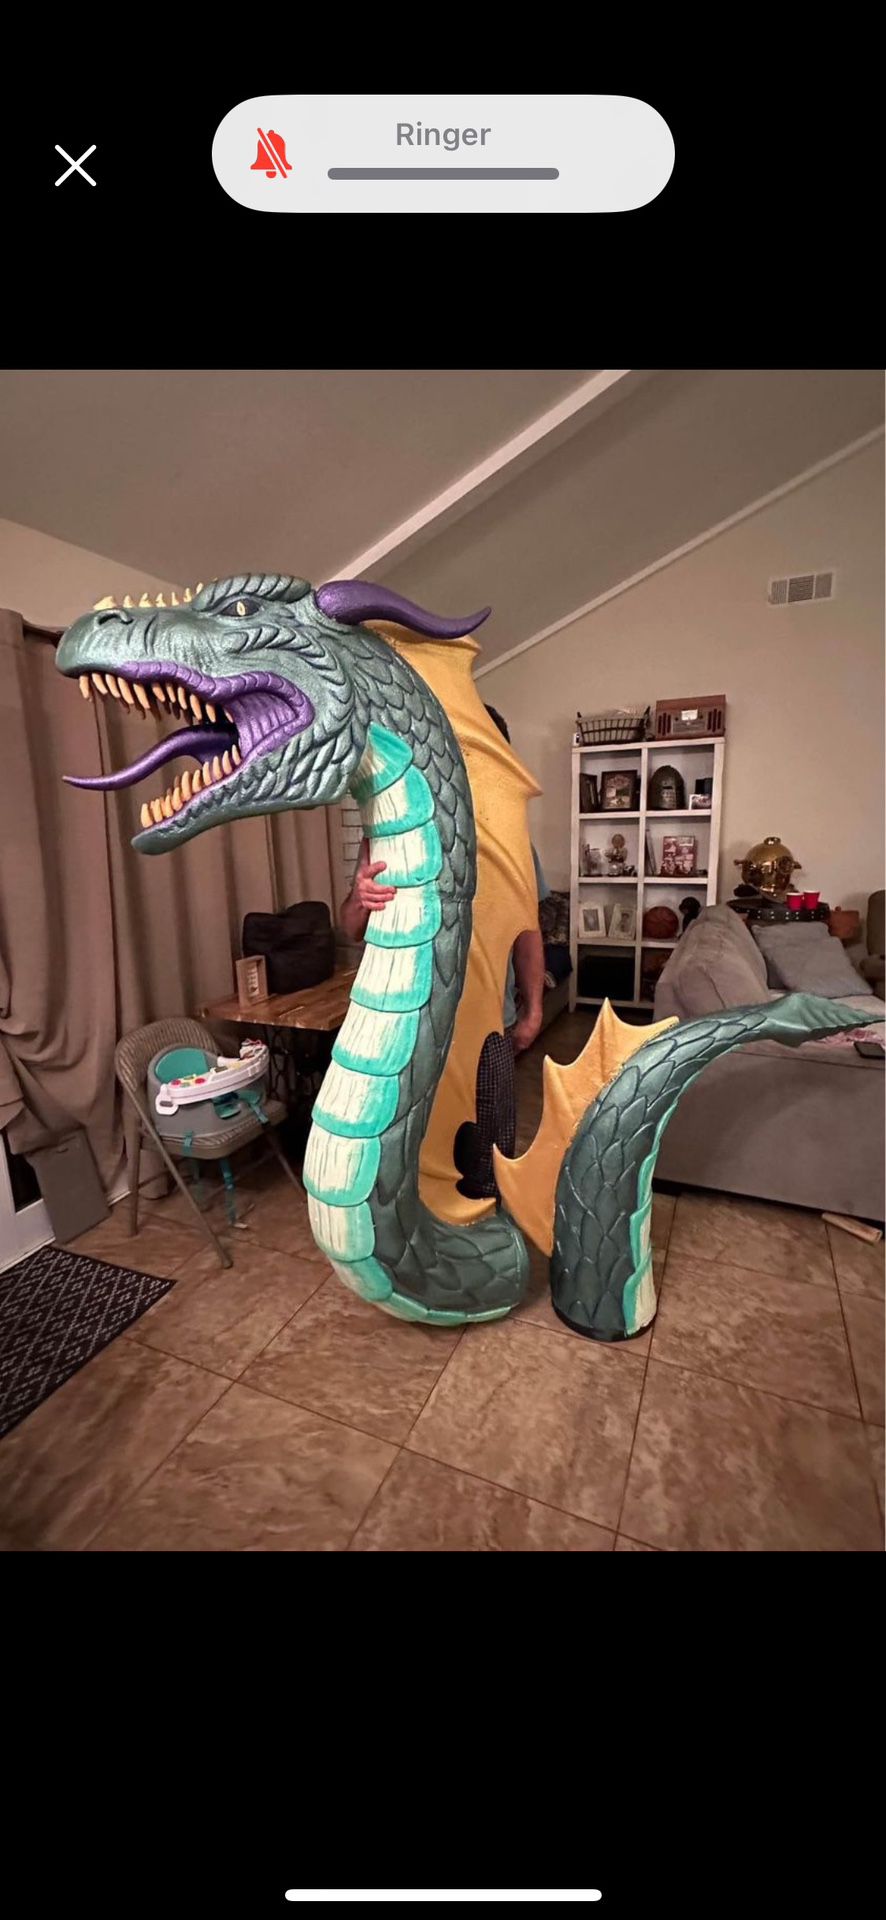 7 Ft Tall Giant Dragon Movie Prop